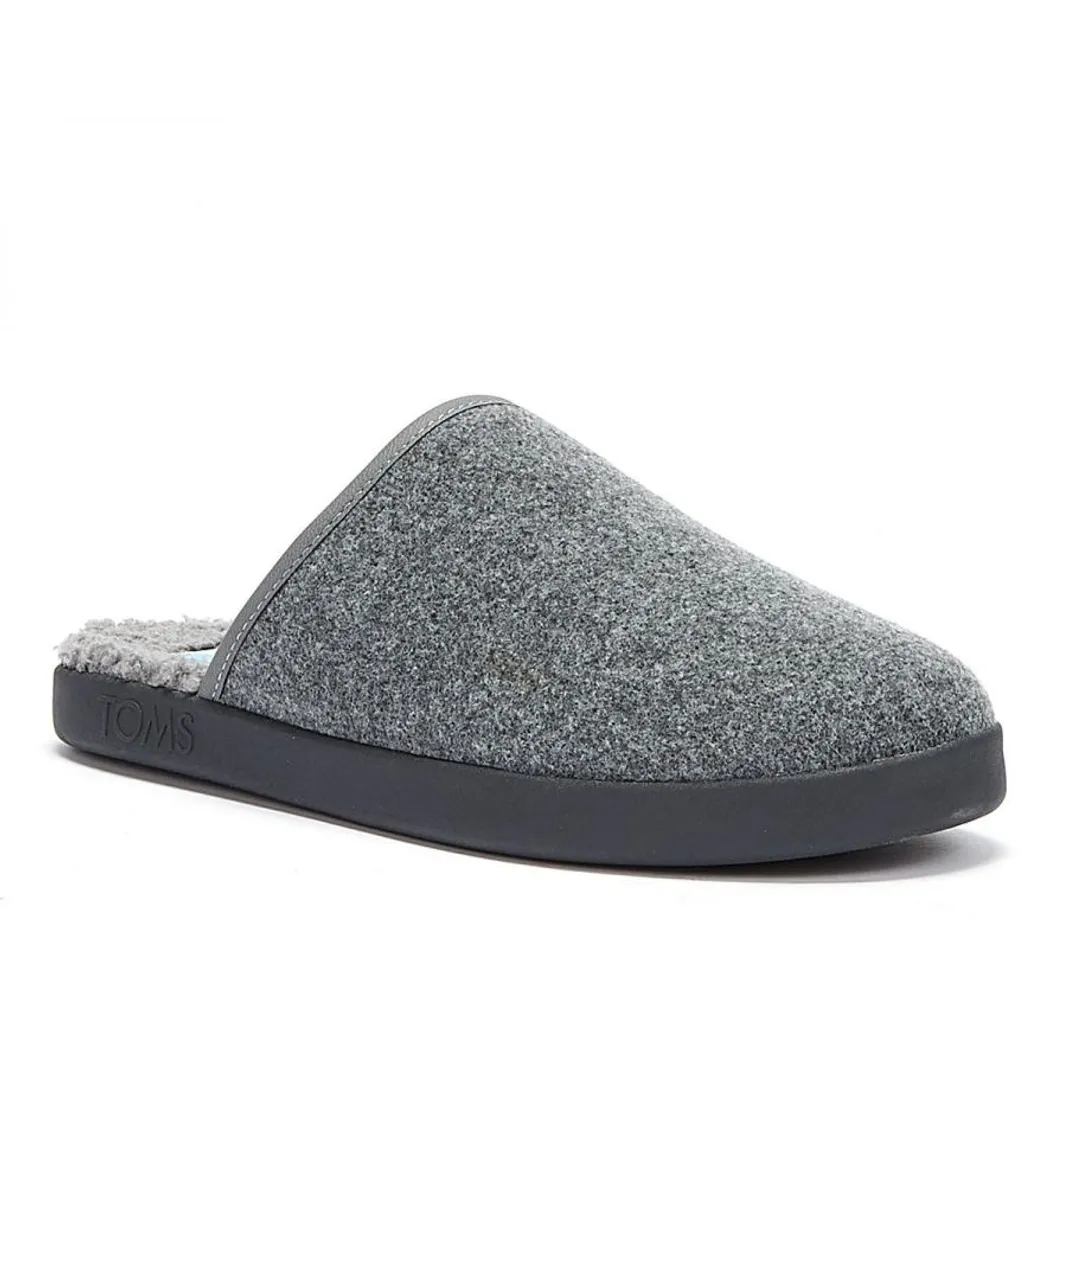 Toms Mens Harbor Slippers - Grey Textile